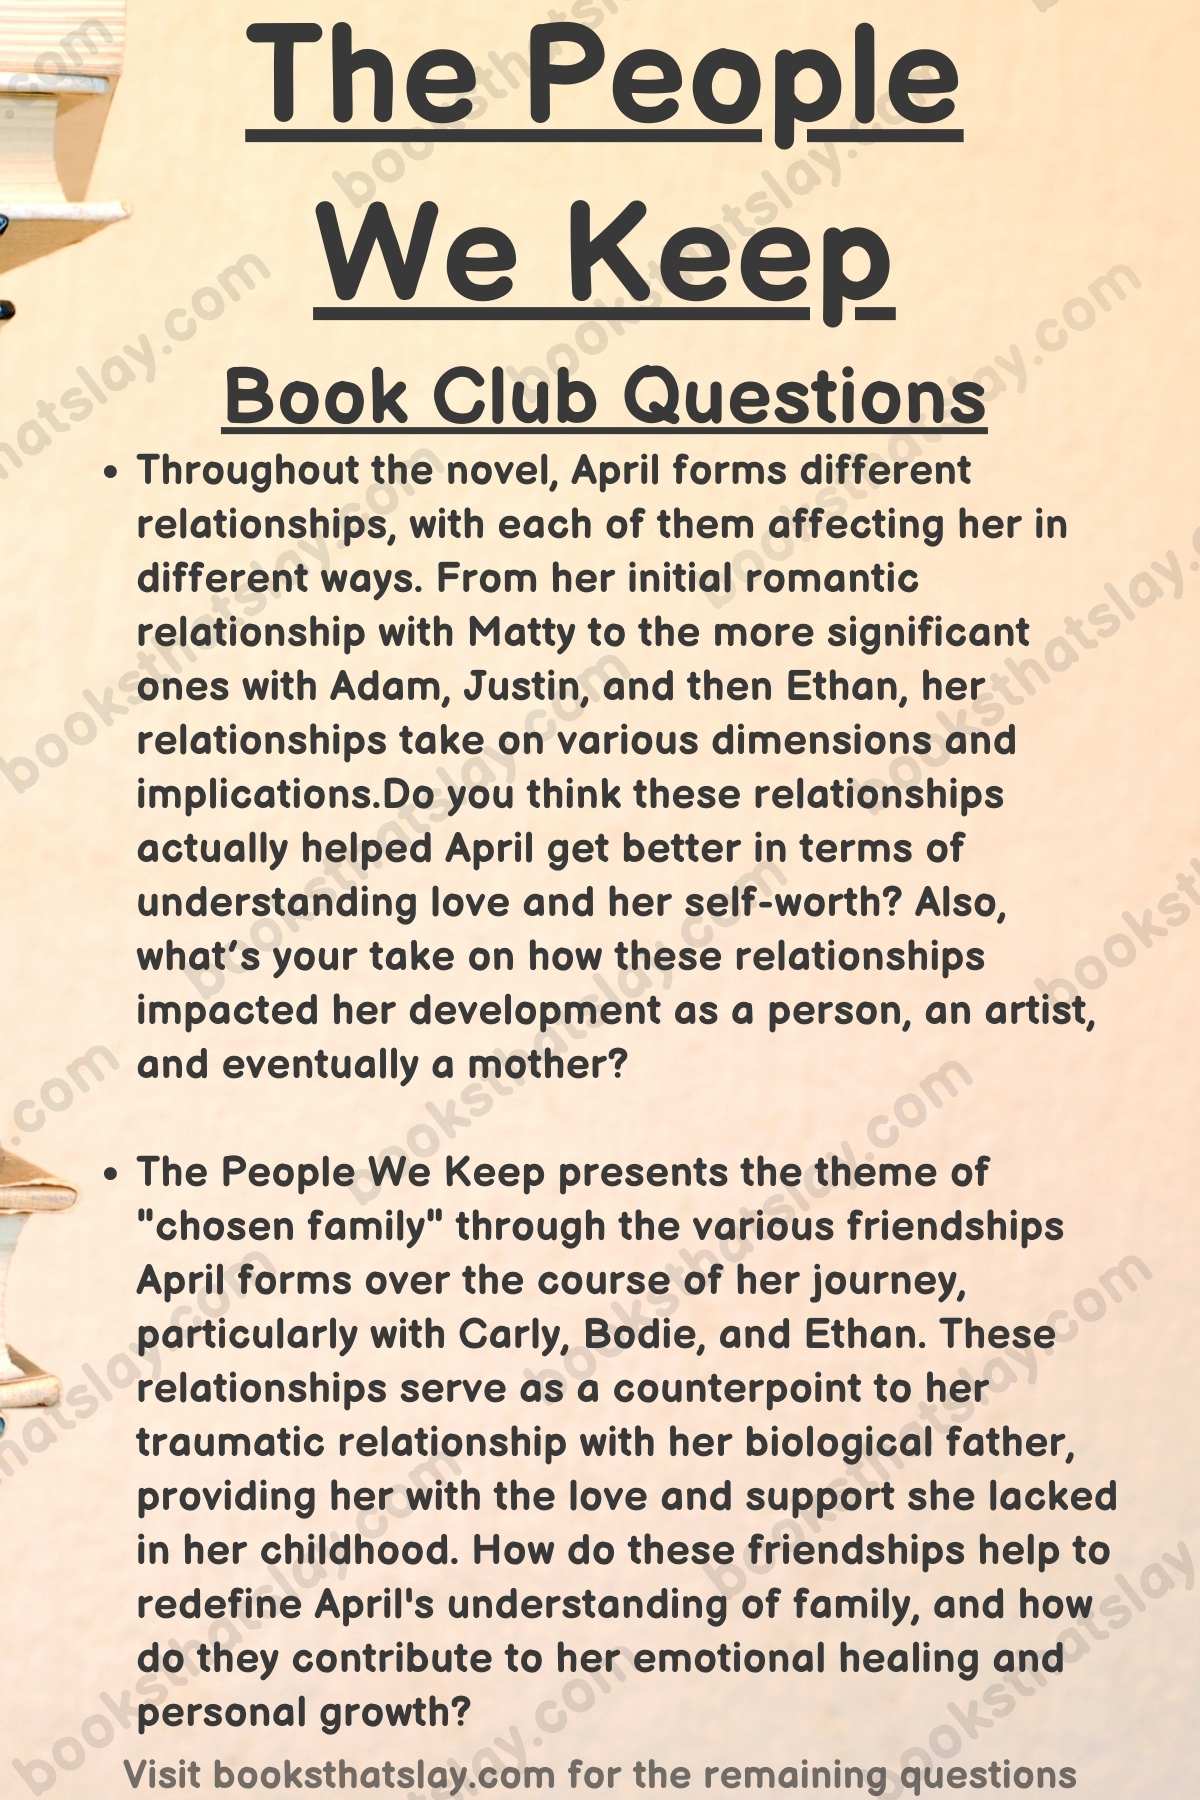 The People We Keep Book Club Questions Infographic
